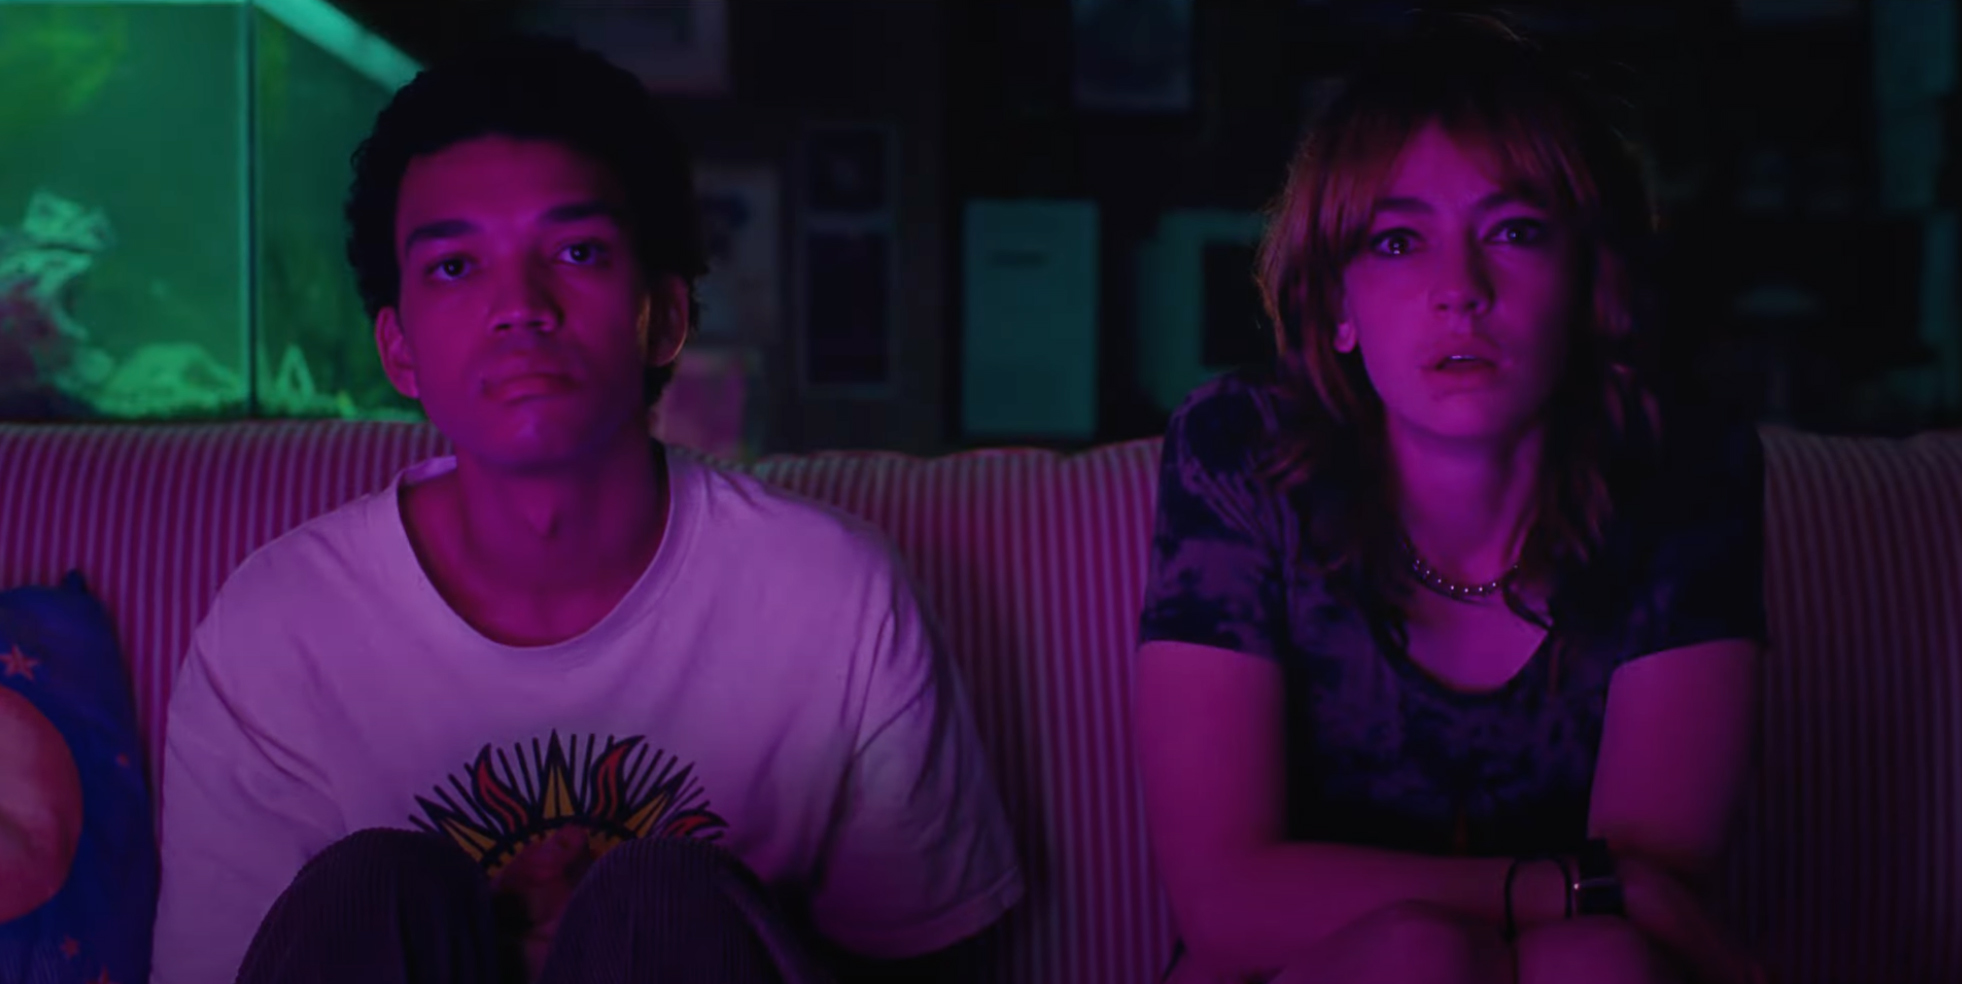 I SAW THE TV GLOW Trailer: Justice Smith is Transported to a New Reality in Jane Schoenbrun’s Mind-Bending Horror